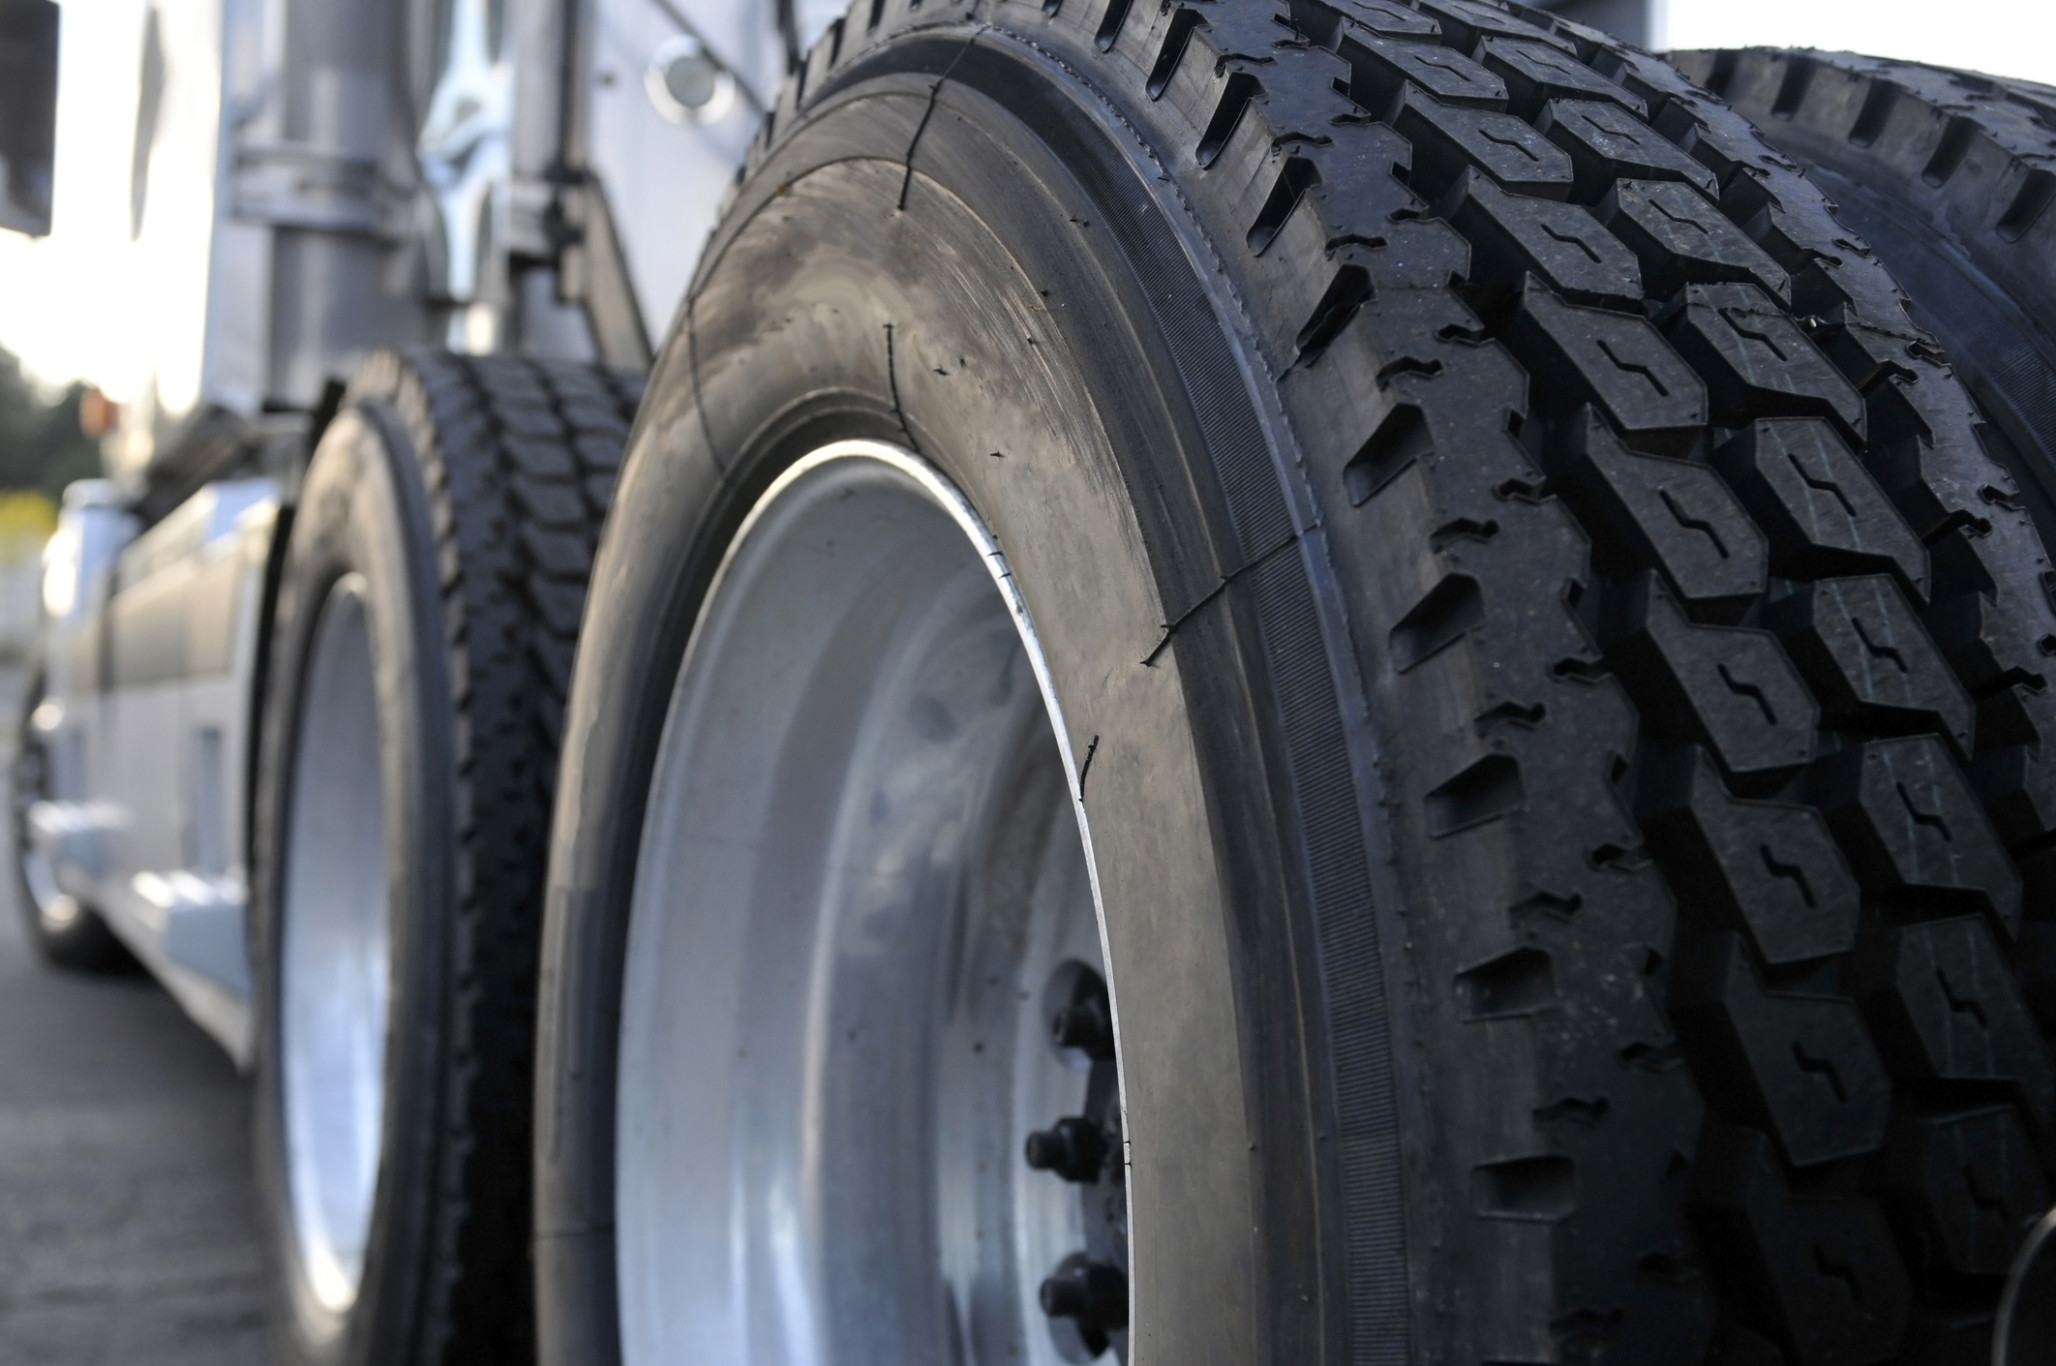 selecting tires for your truck, Stopping Distances vs. Fuel Economy